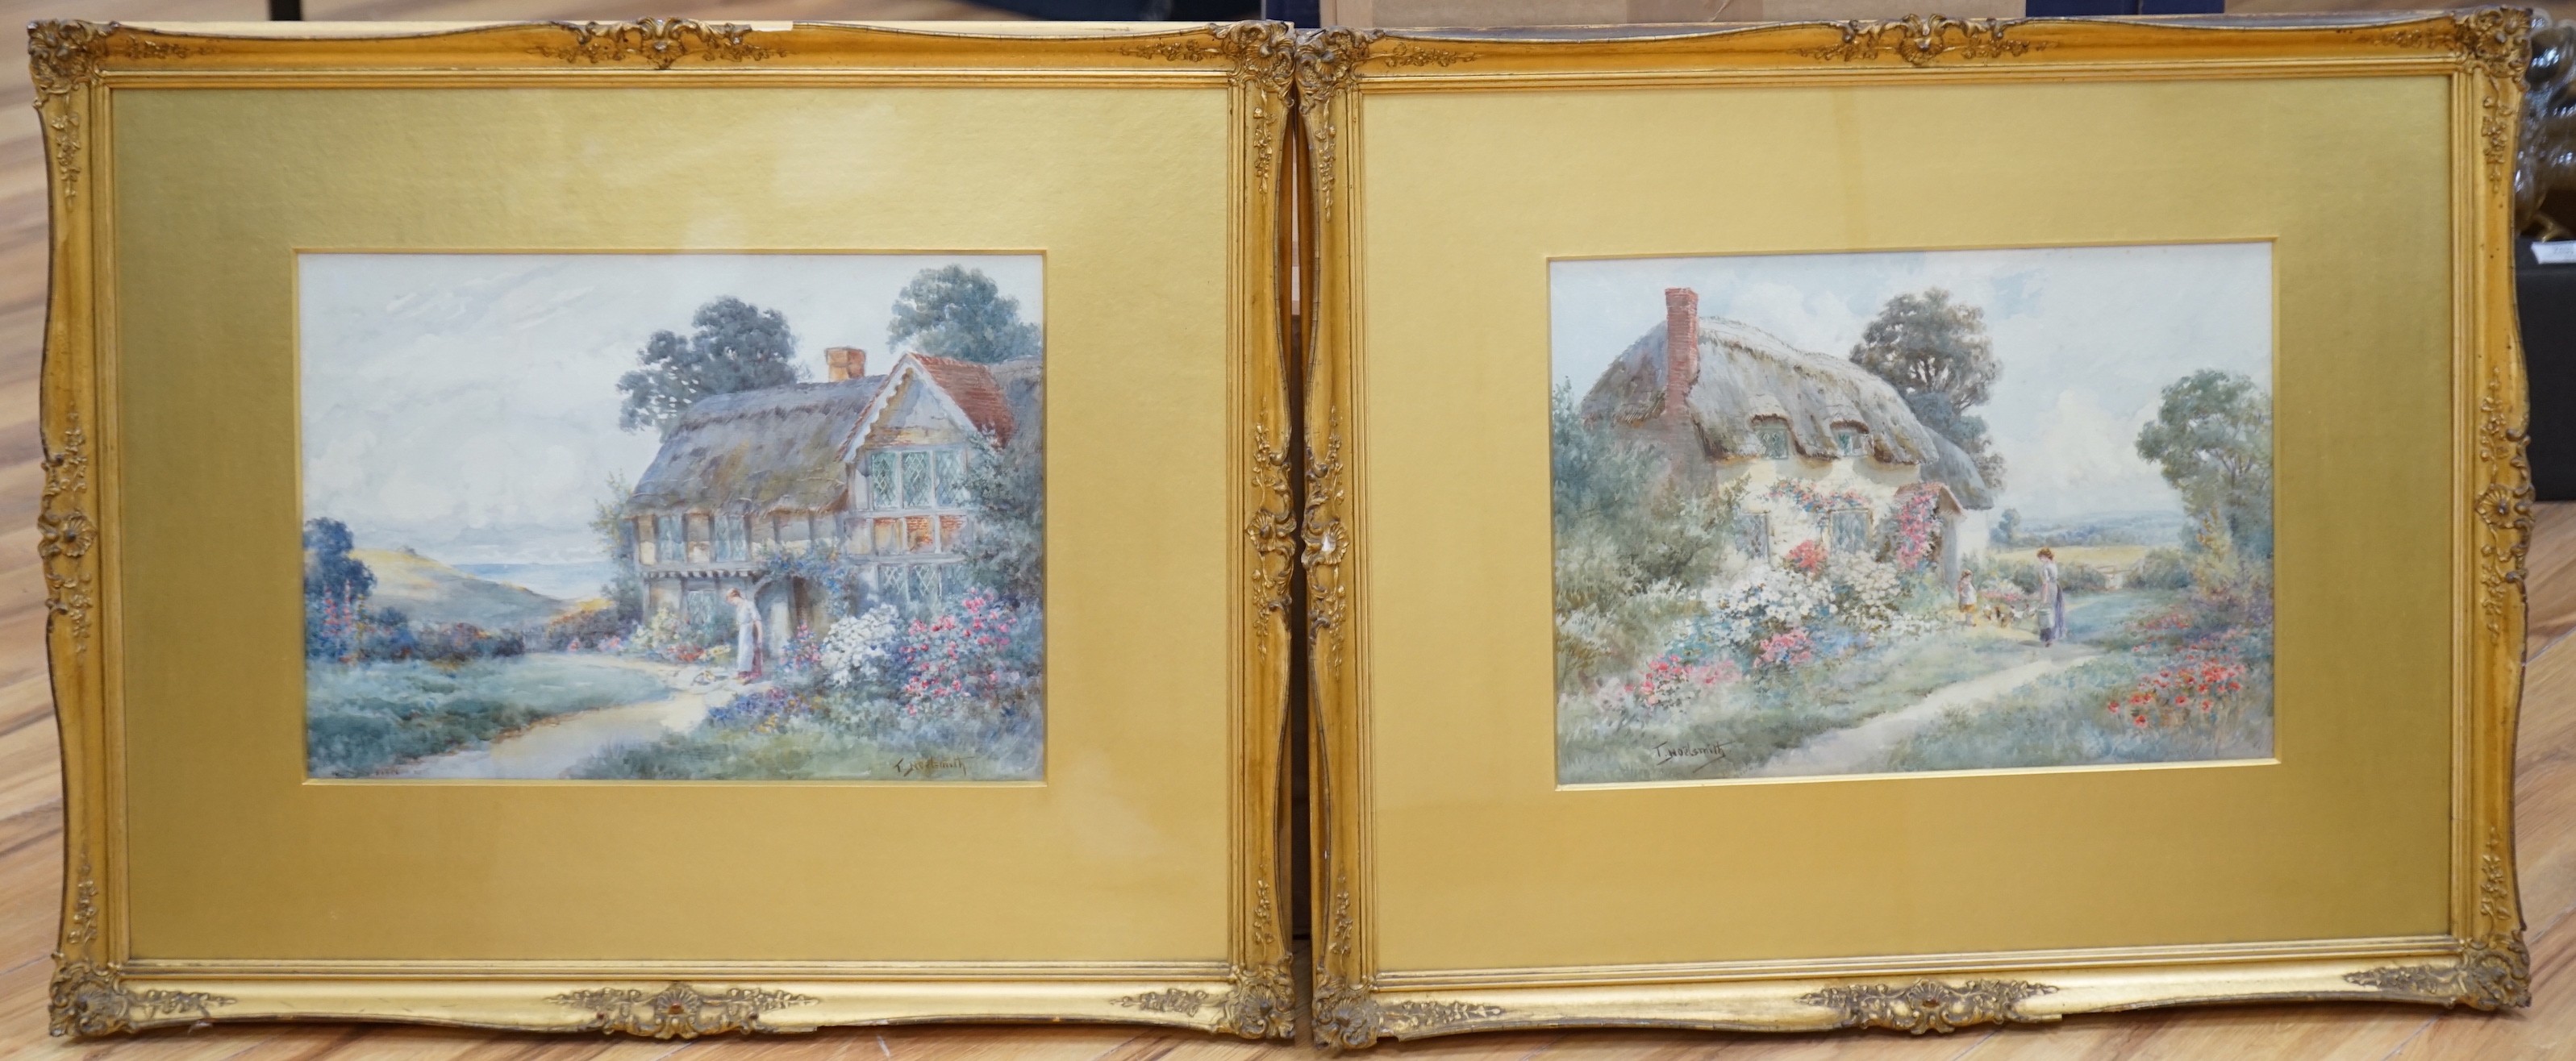 Thomas Noel Smith (1840-1900), pair of watercolours, Vernbury, Kent and Grinstead, Surrey, signed and titled, 25 x 35cm